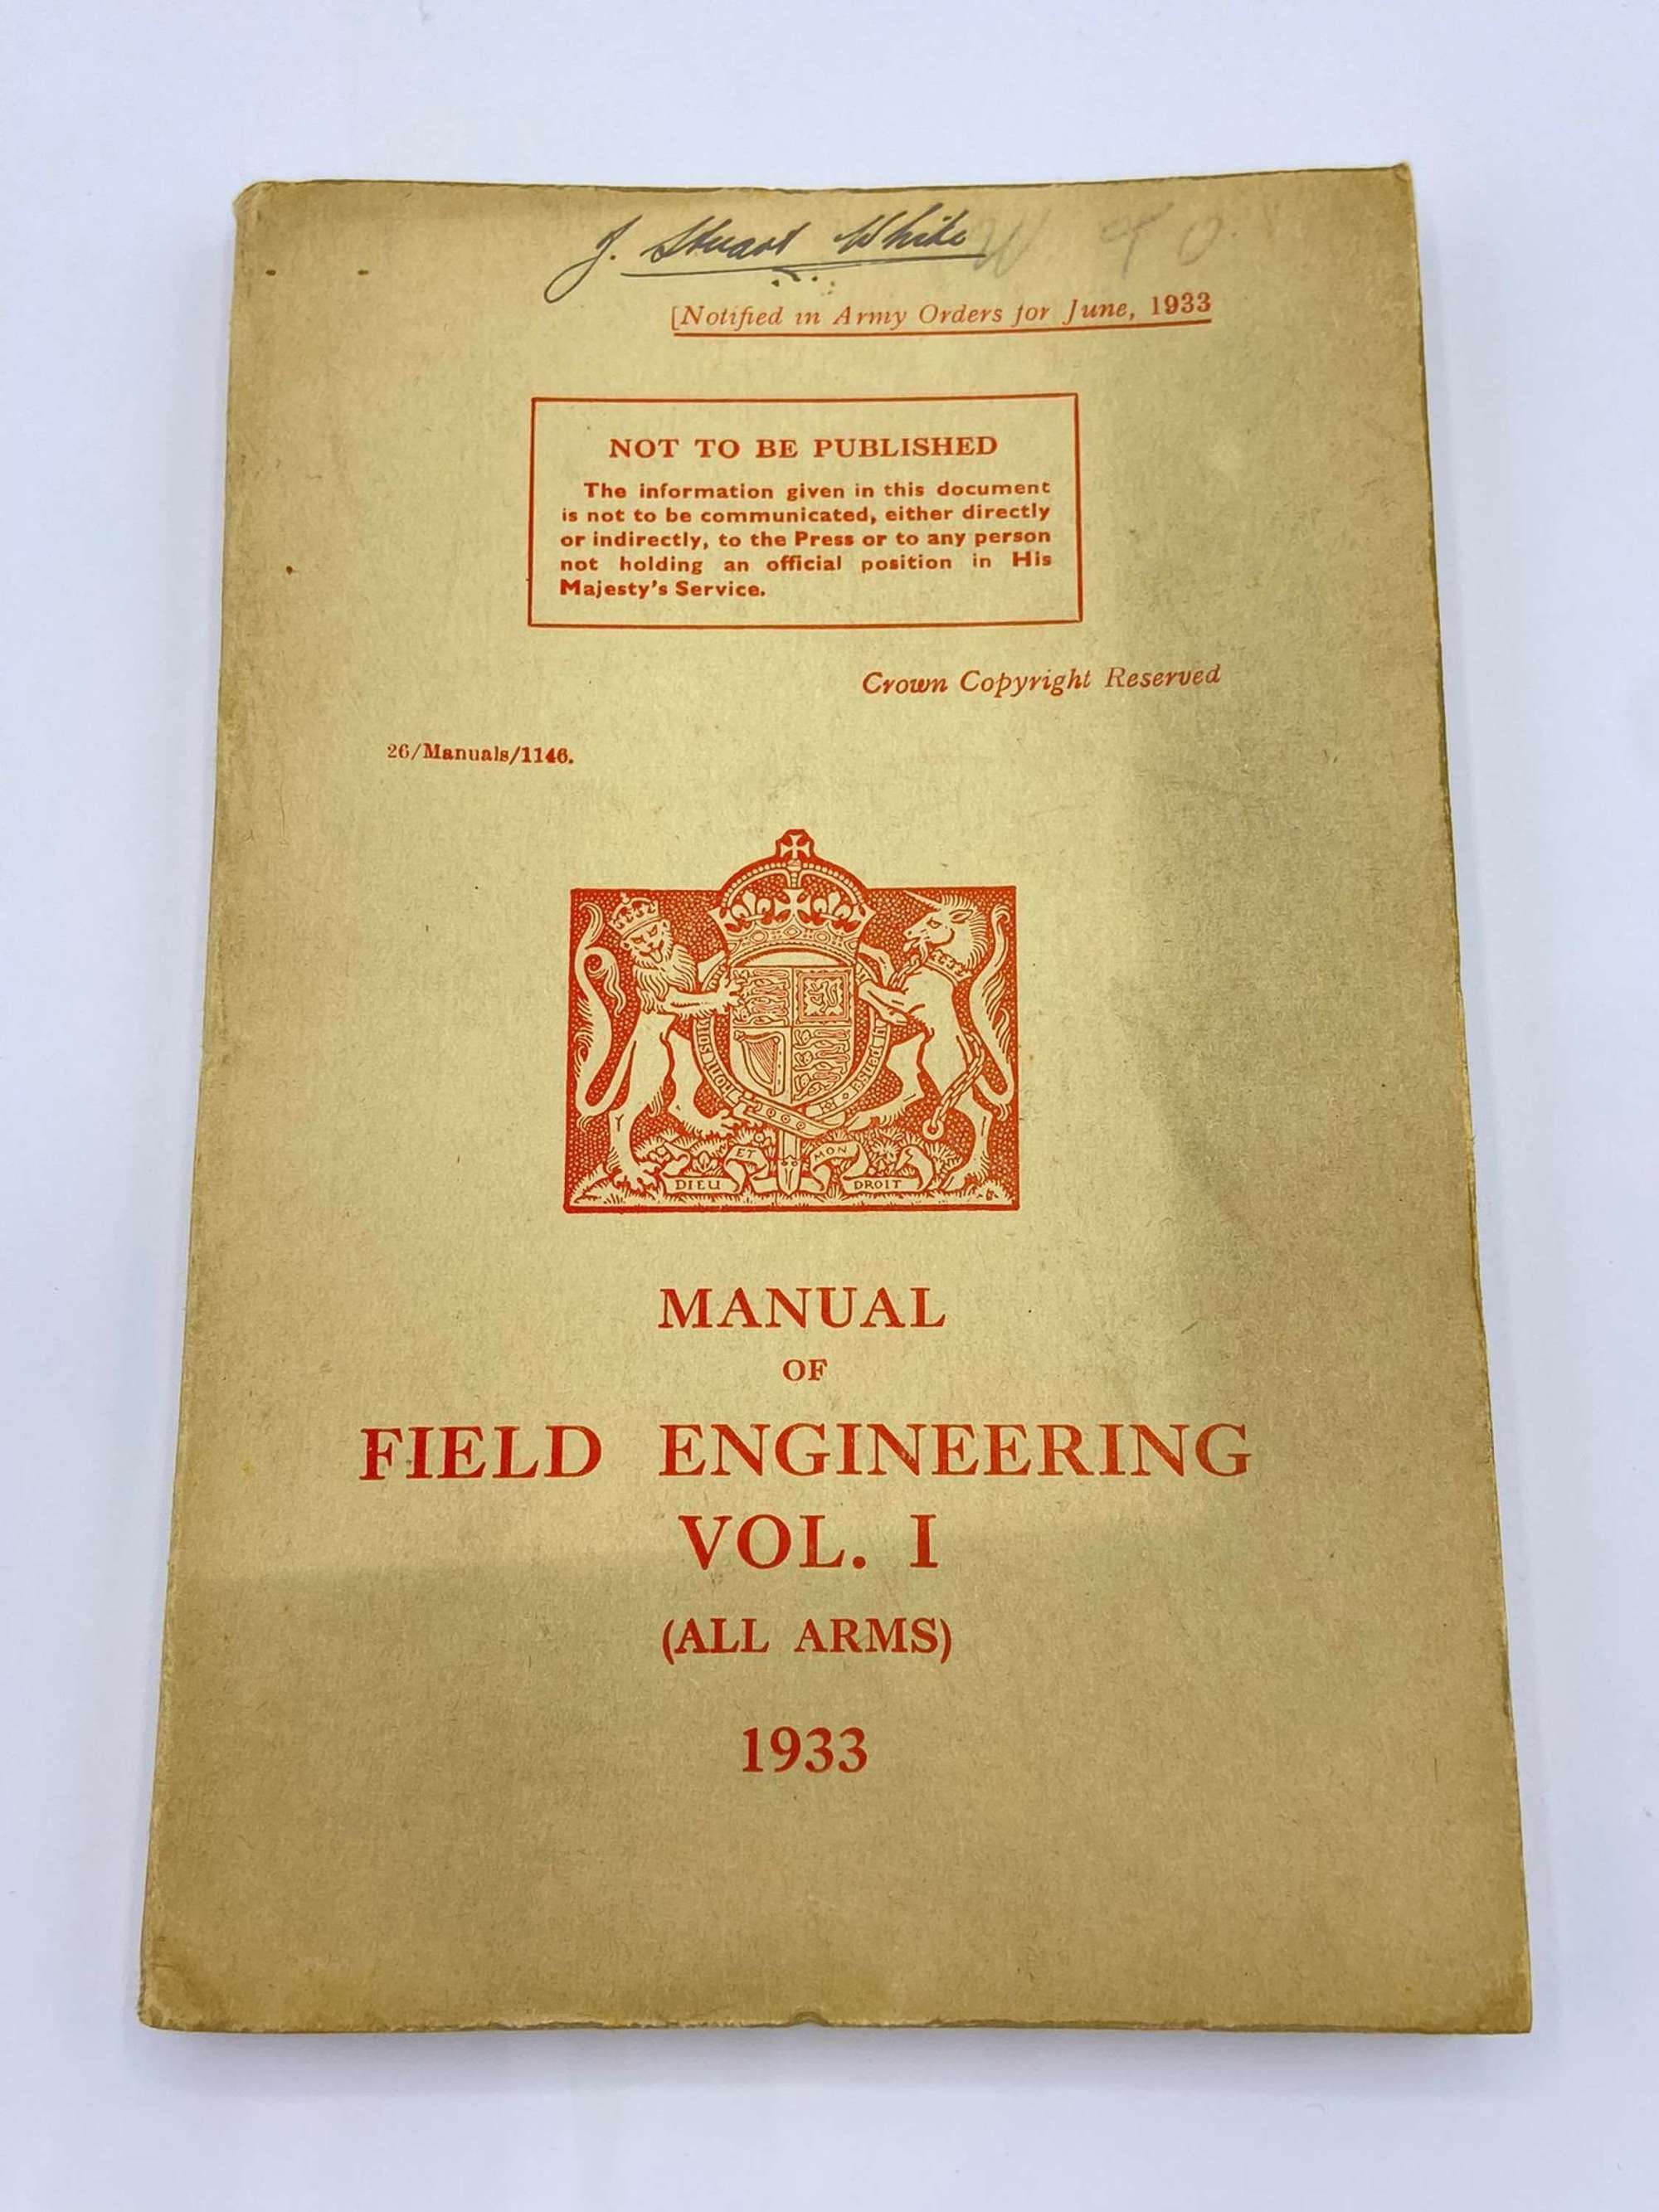 WW2 British Manual Of Field Engineering Vol 1 (All Arms) 1933